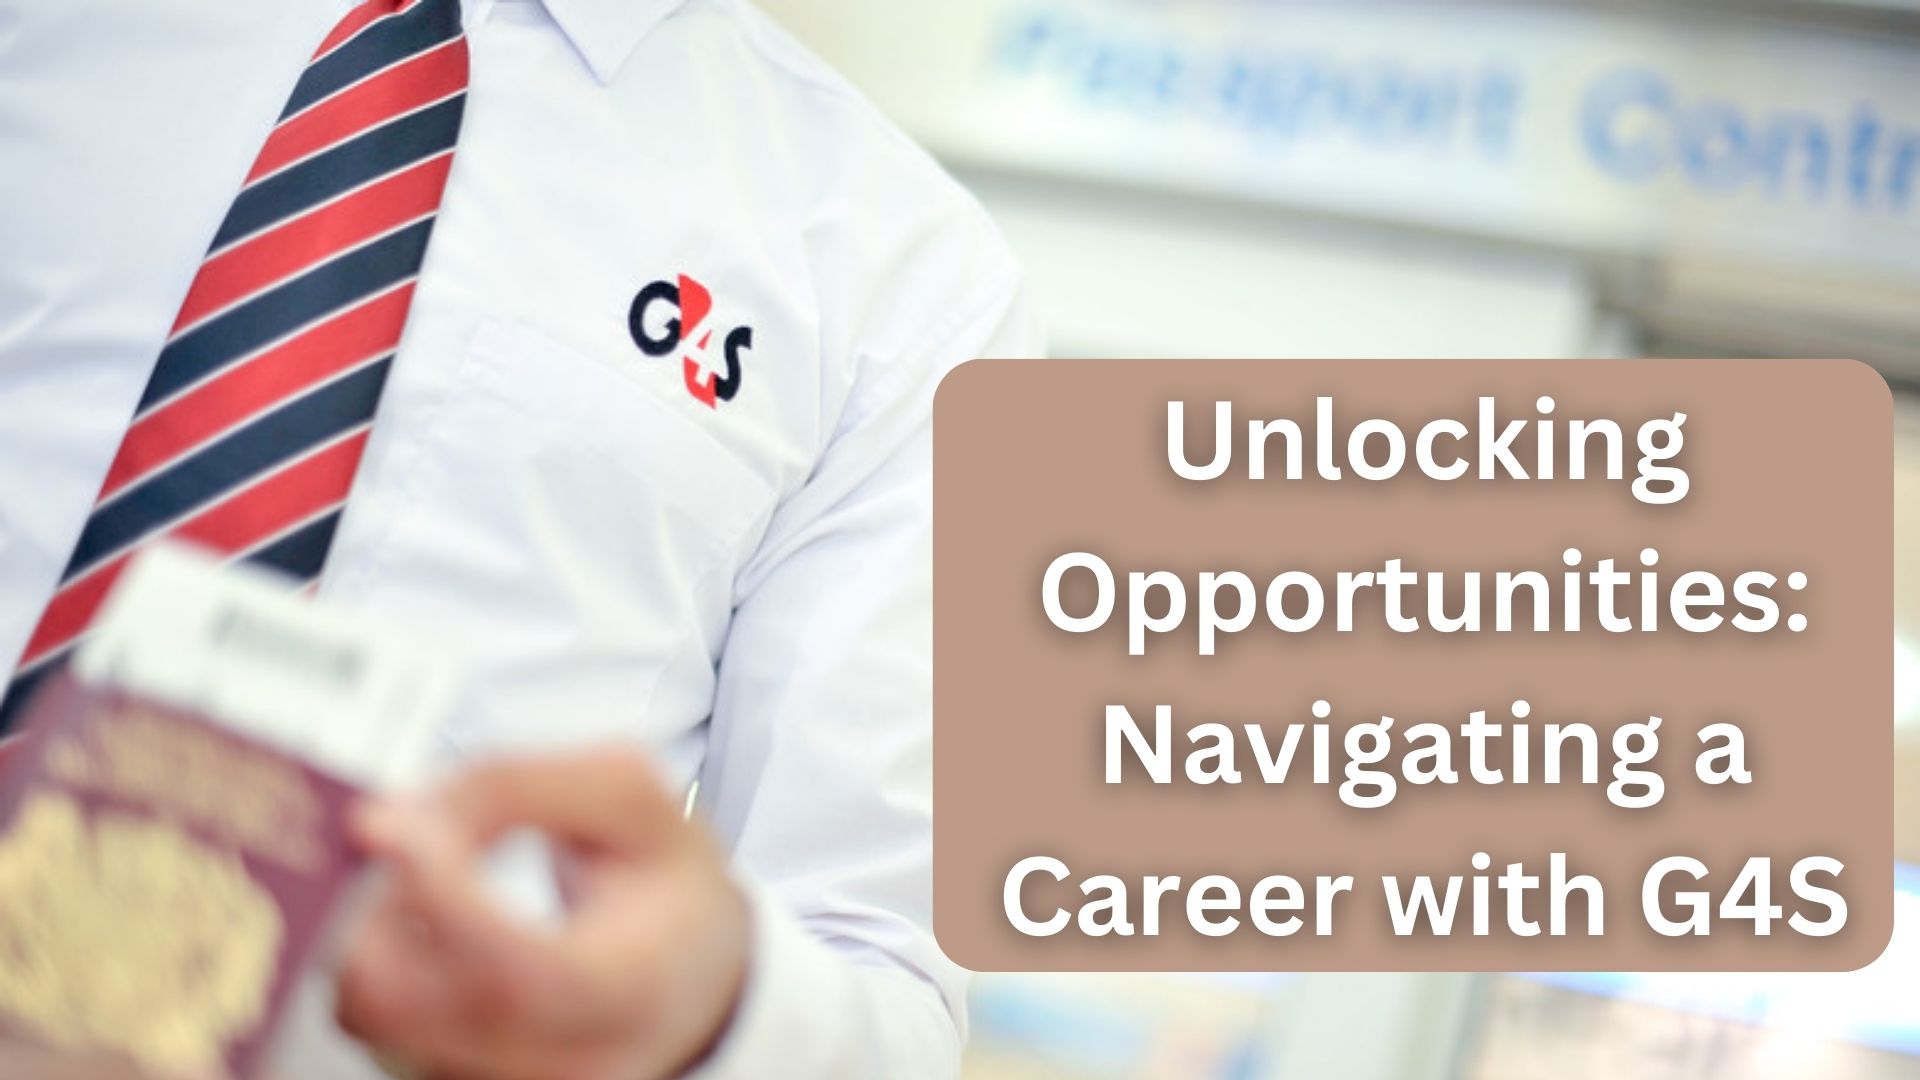 Unlocking Opportunities: Navigating a Career with G4S